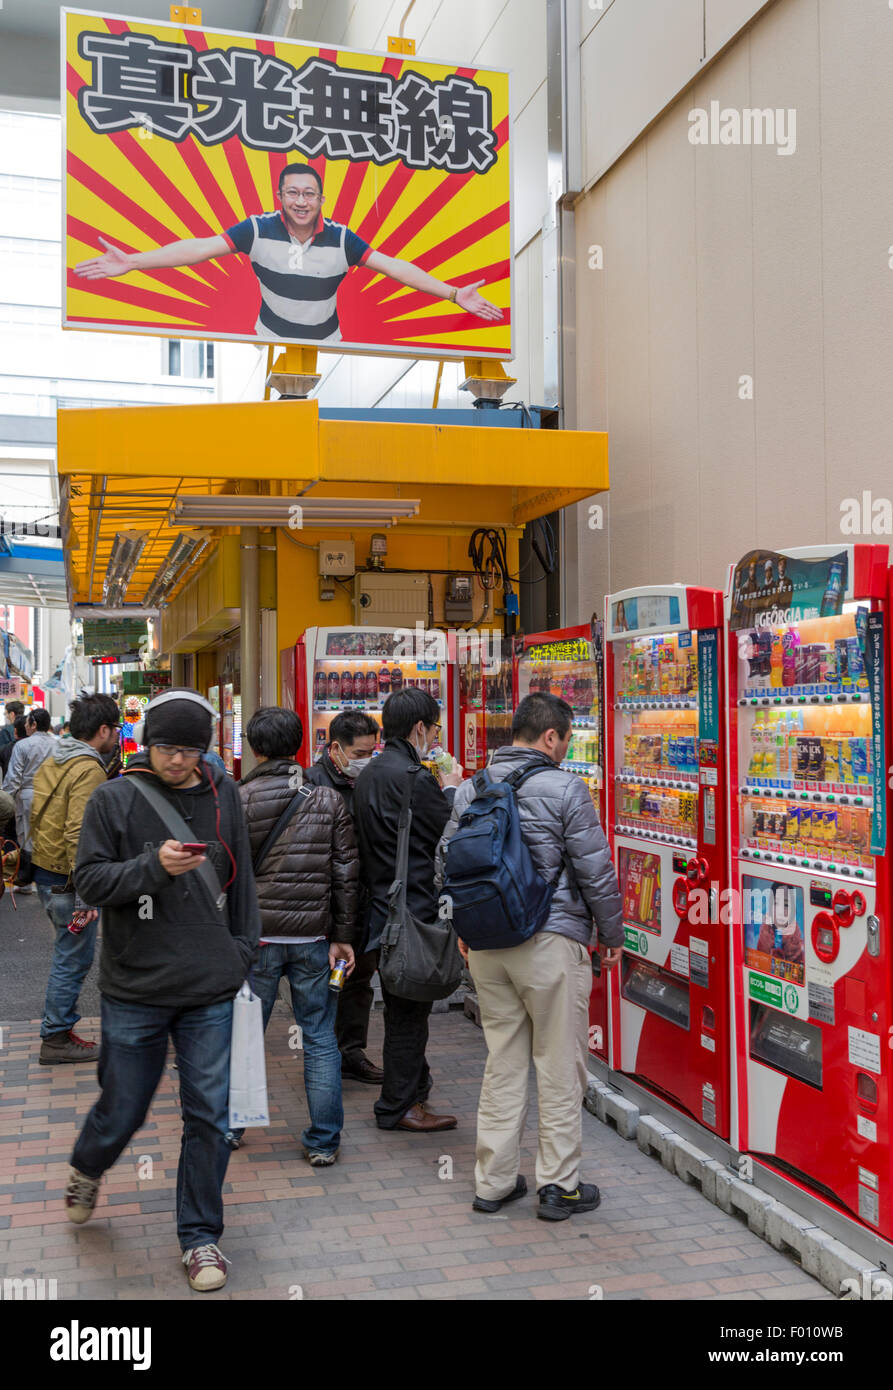 Japanese men study cell phones and vending machines in an alley in the Akihabara Electric Town Stock Photo